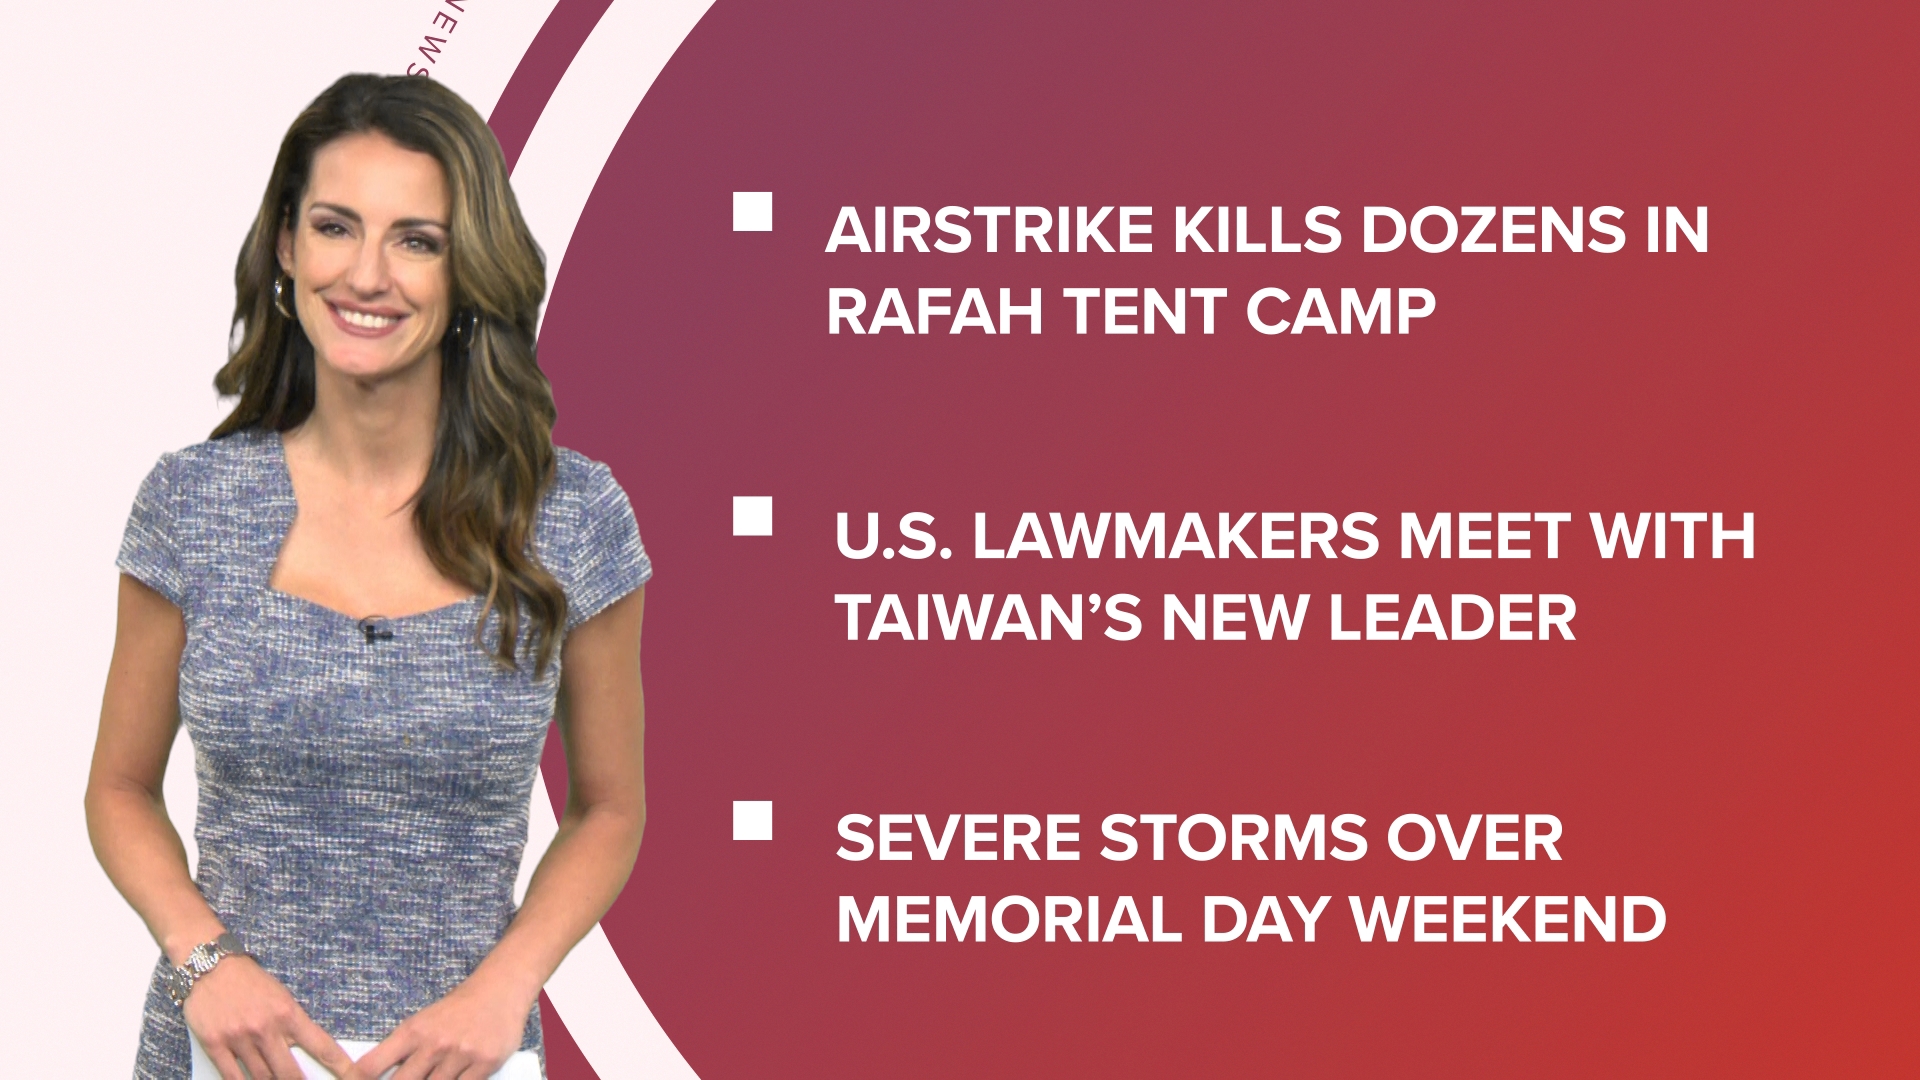 A look at what is happening in the news from airstrike in Rafah kills dozens to honoring fallen heroes on Memorial Day and weekend box office flops.